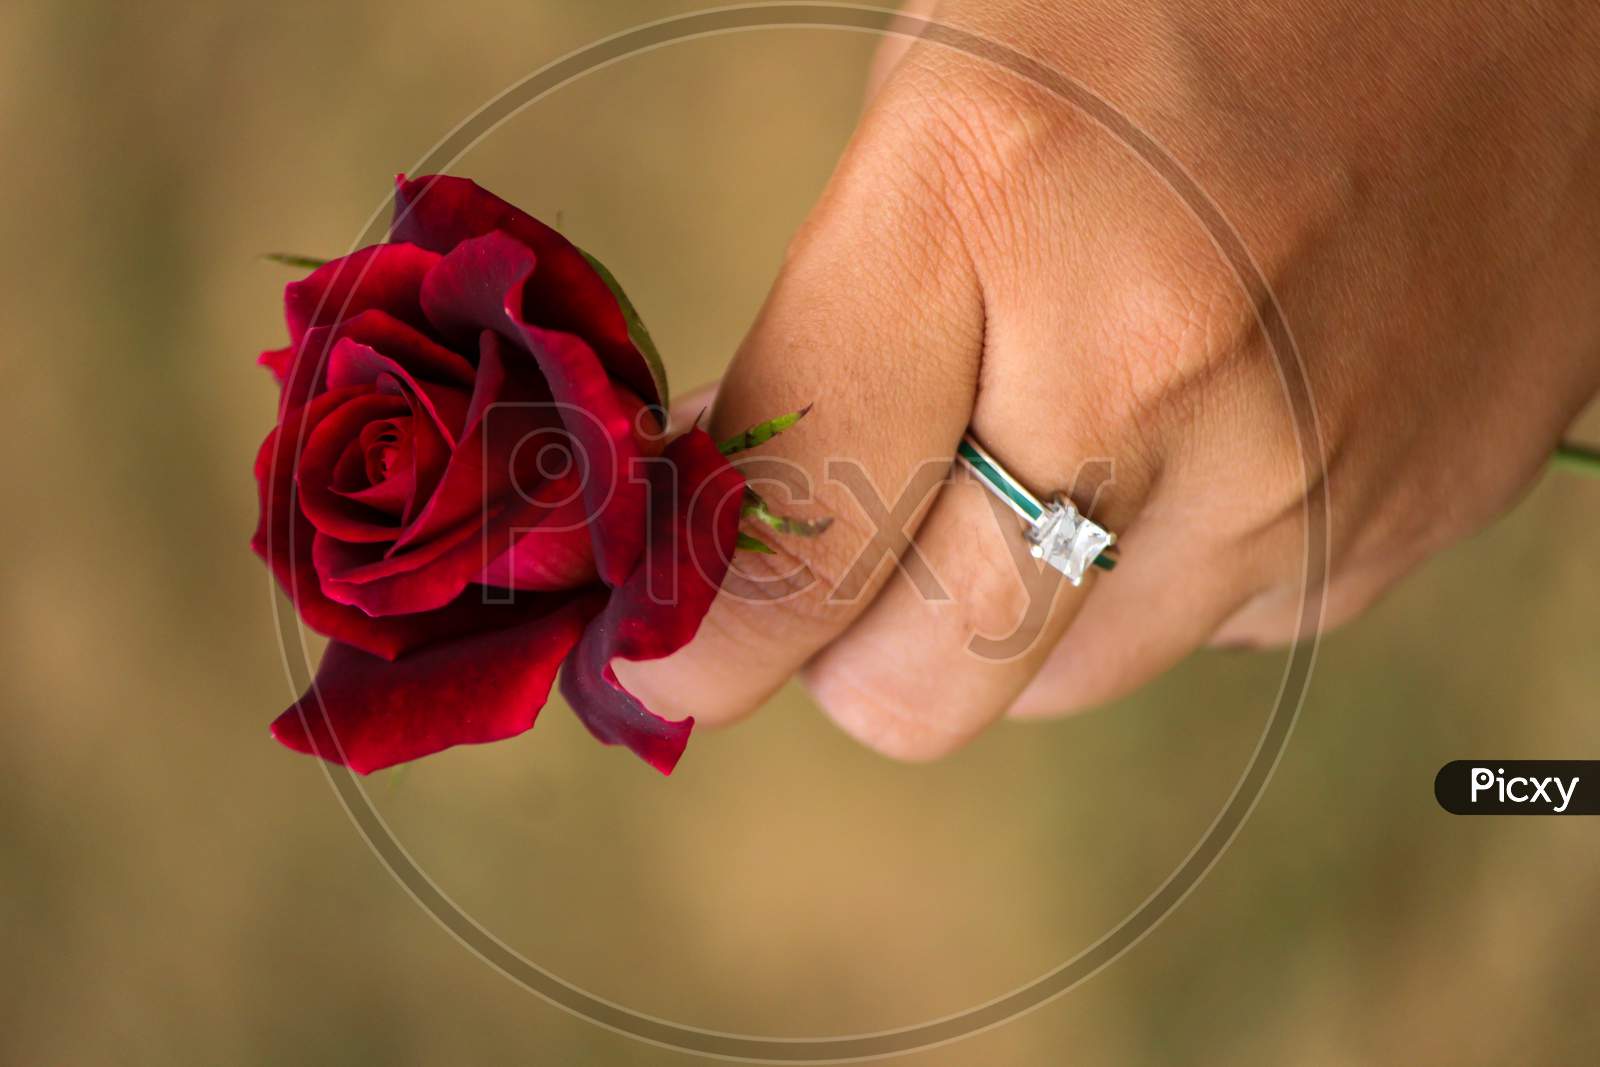 red rose in hand of a woman